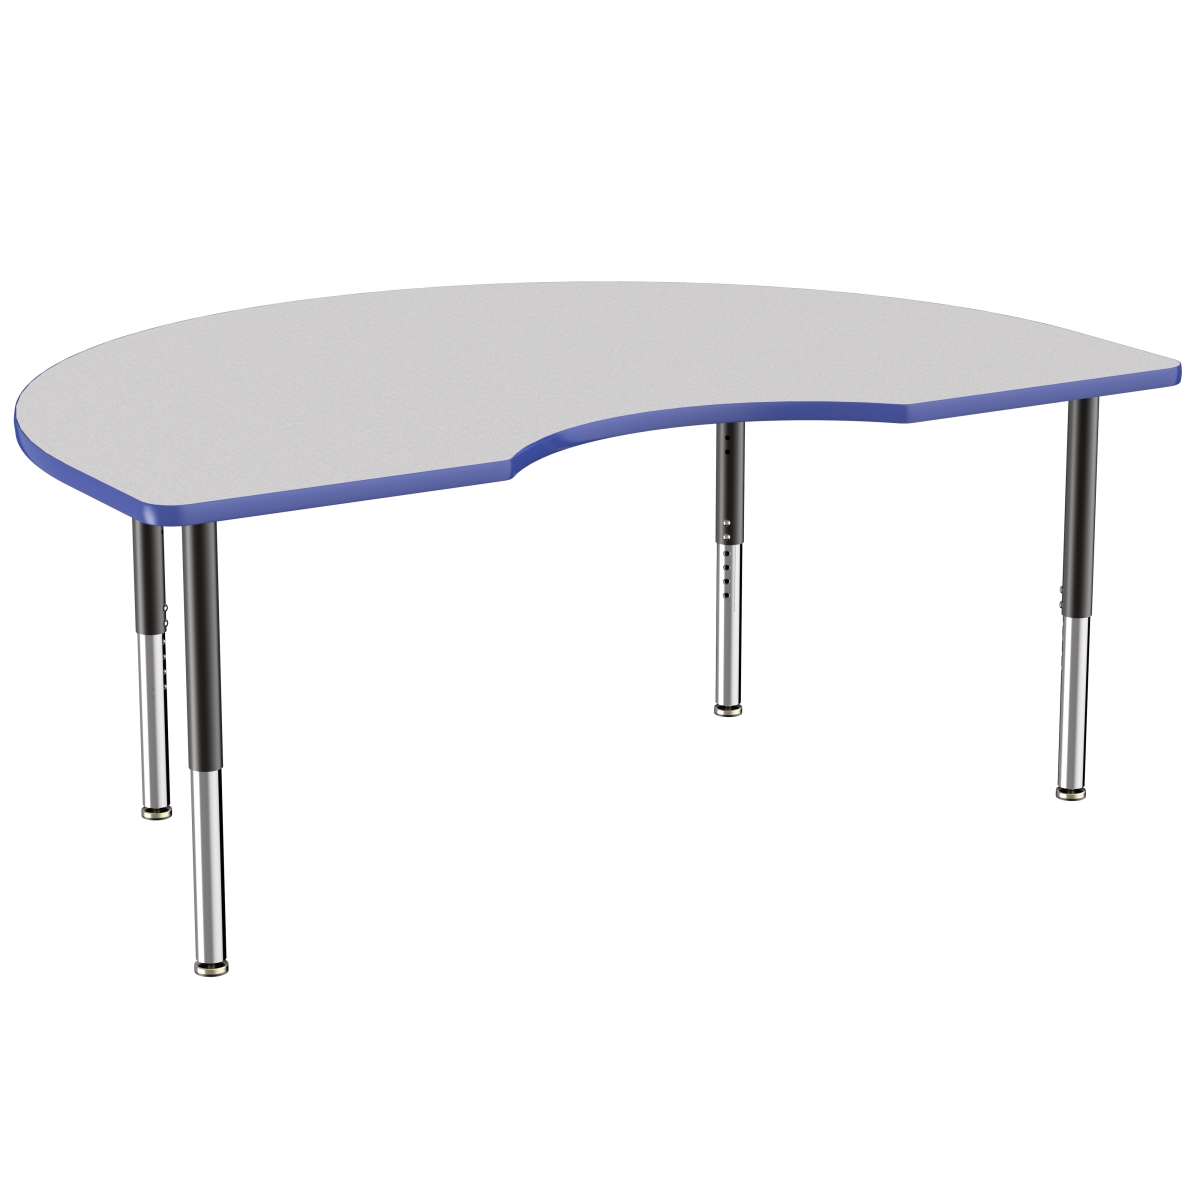 10088-gybl 48 X 72 In. Kidney T-mold Adjustable Activity Table With Super Leg - Grey & Blue